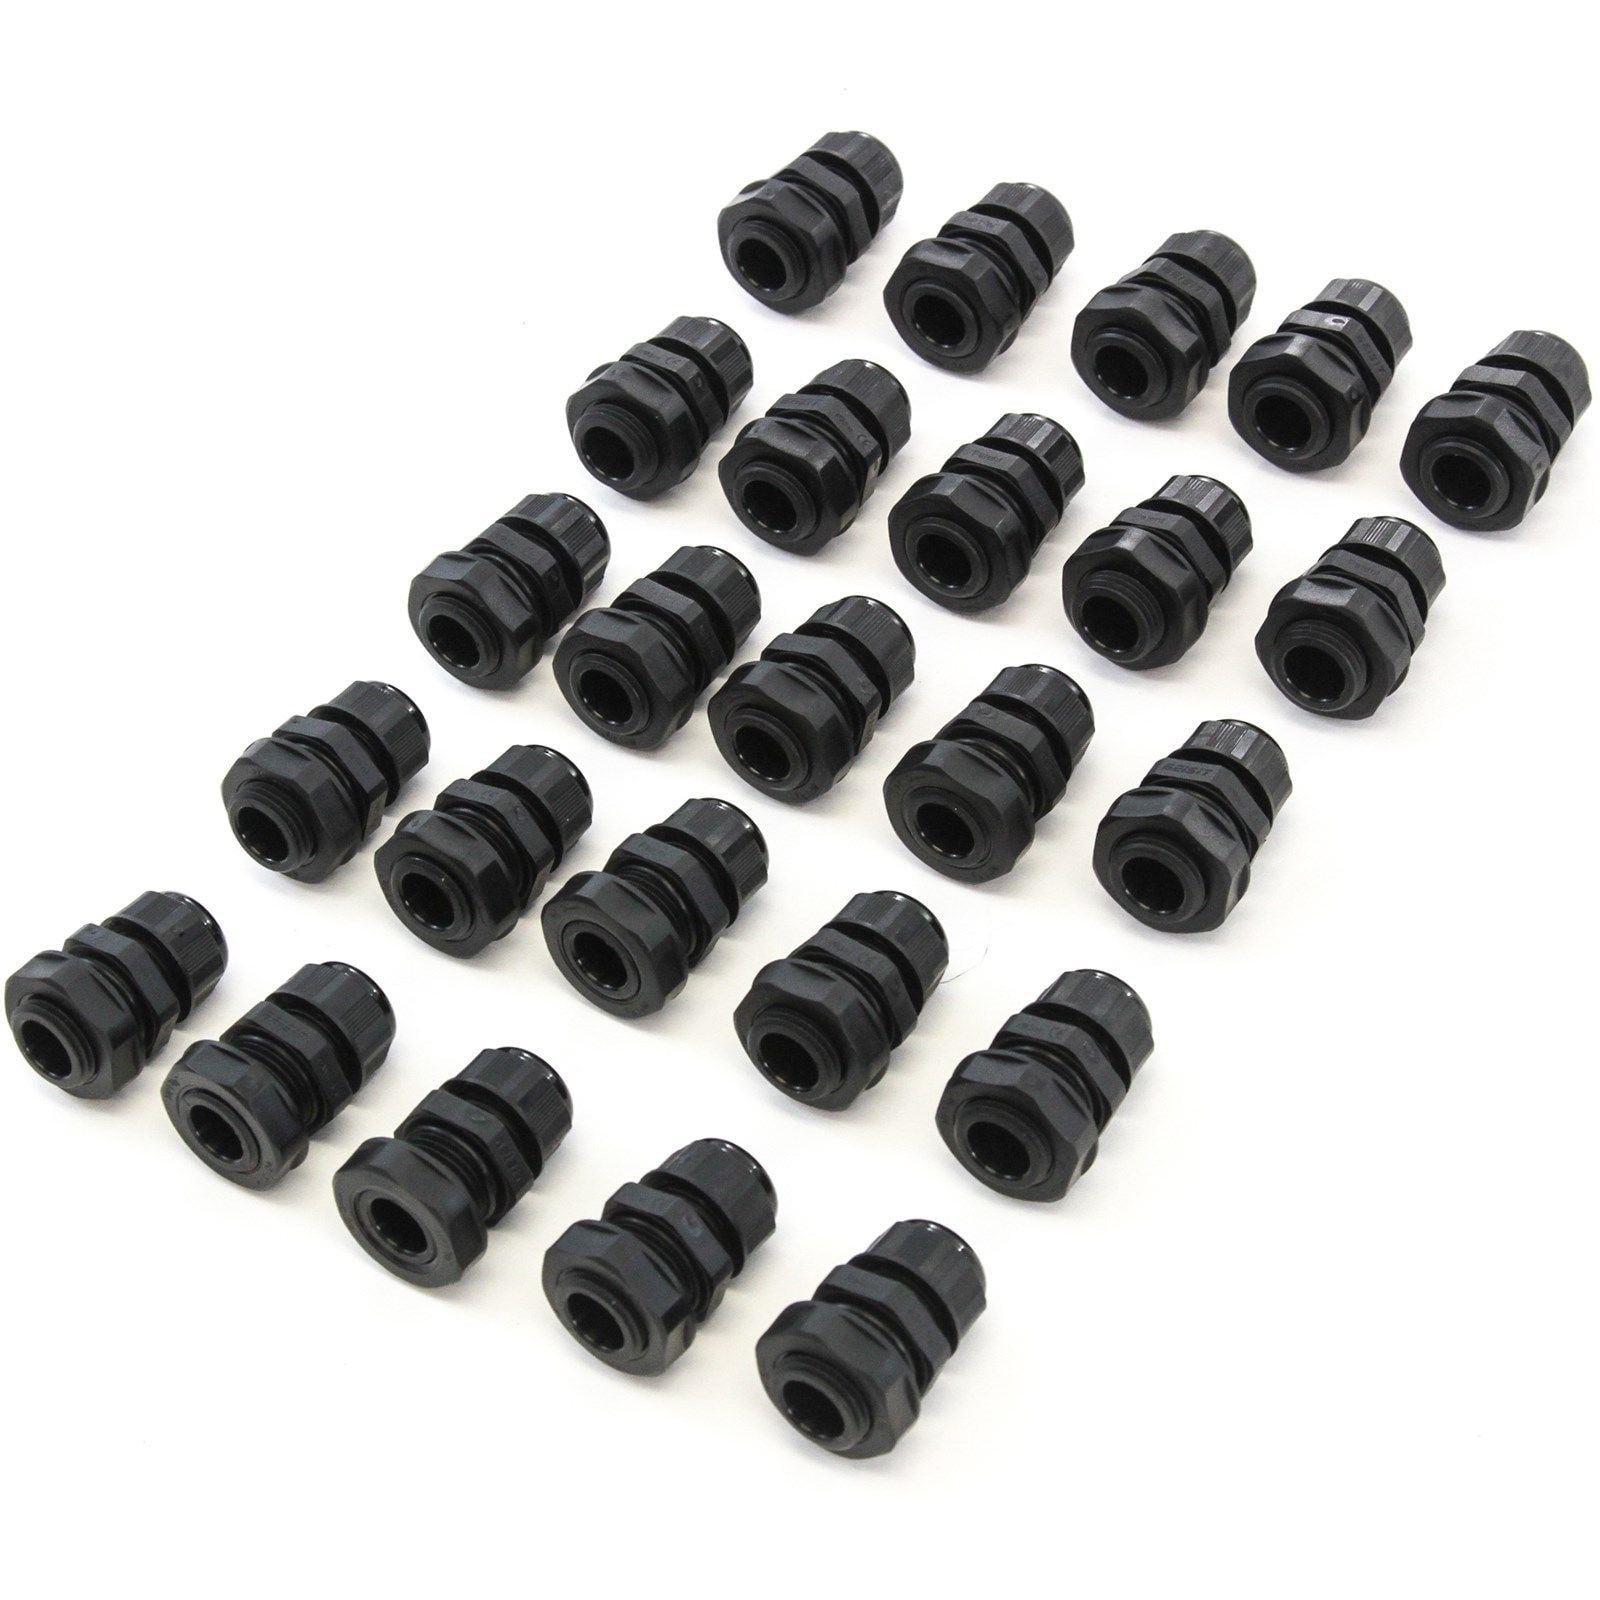 uxcell 4Pcs M12 Cable Gland Waterproof Plastic Joint Adjustable Locknut Black for 3-6.5mm Dia Cable Wire